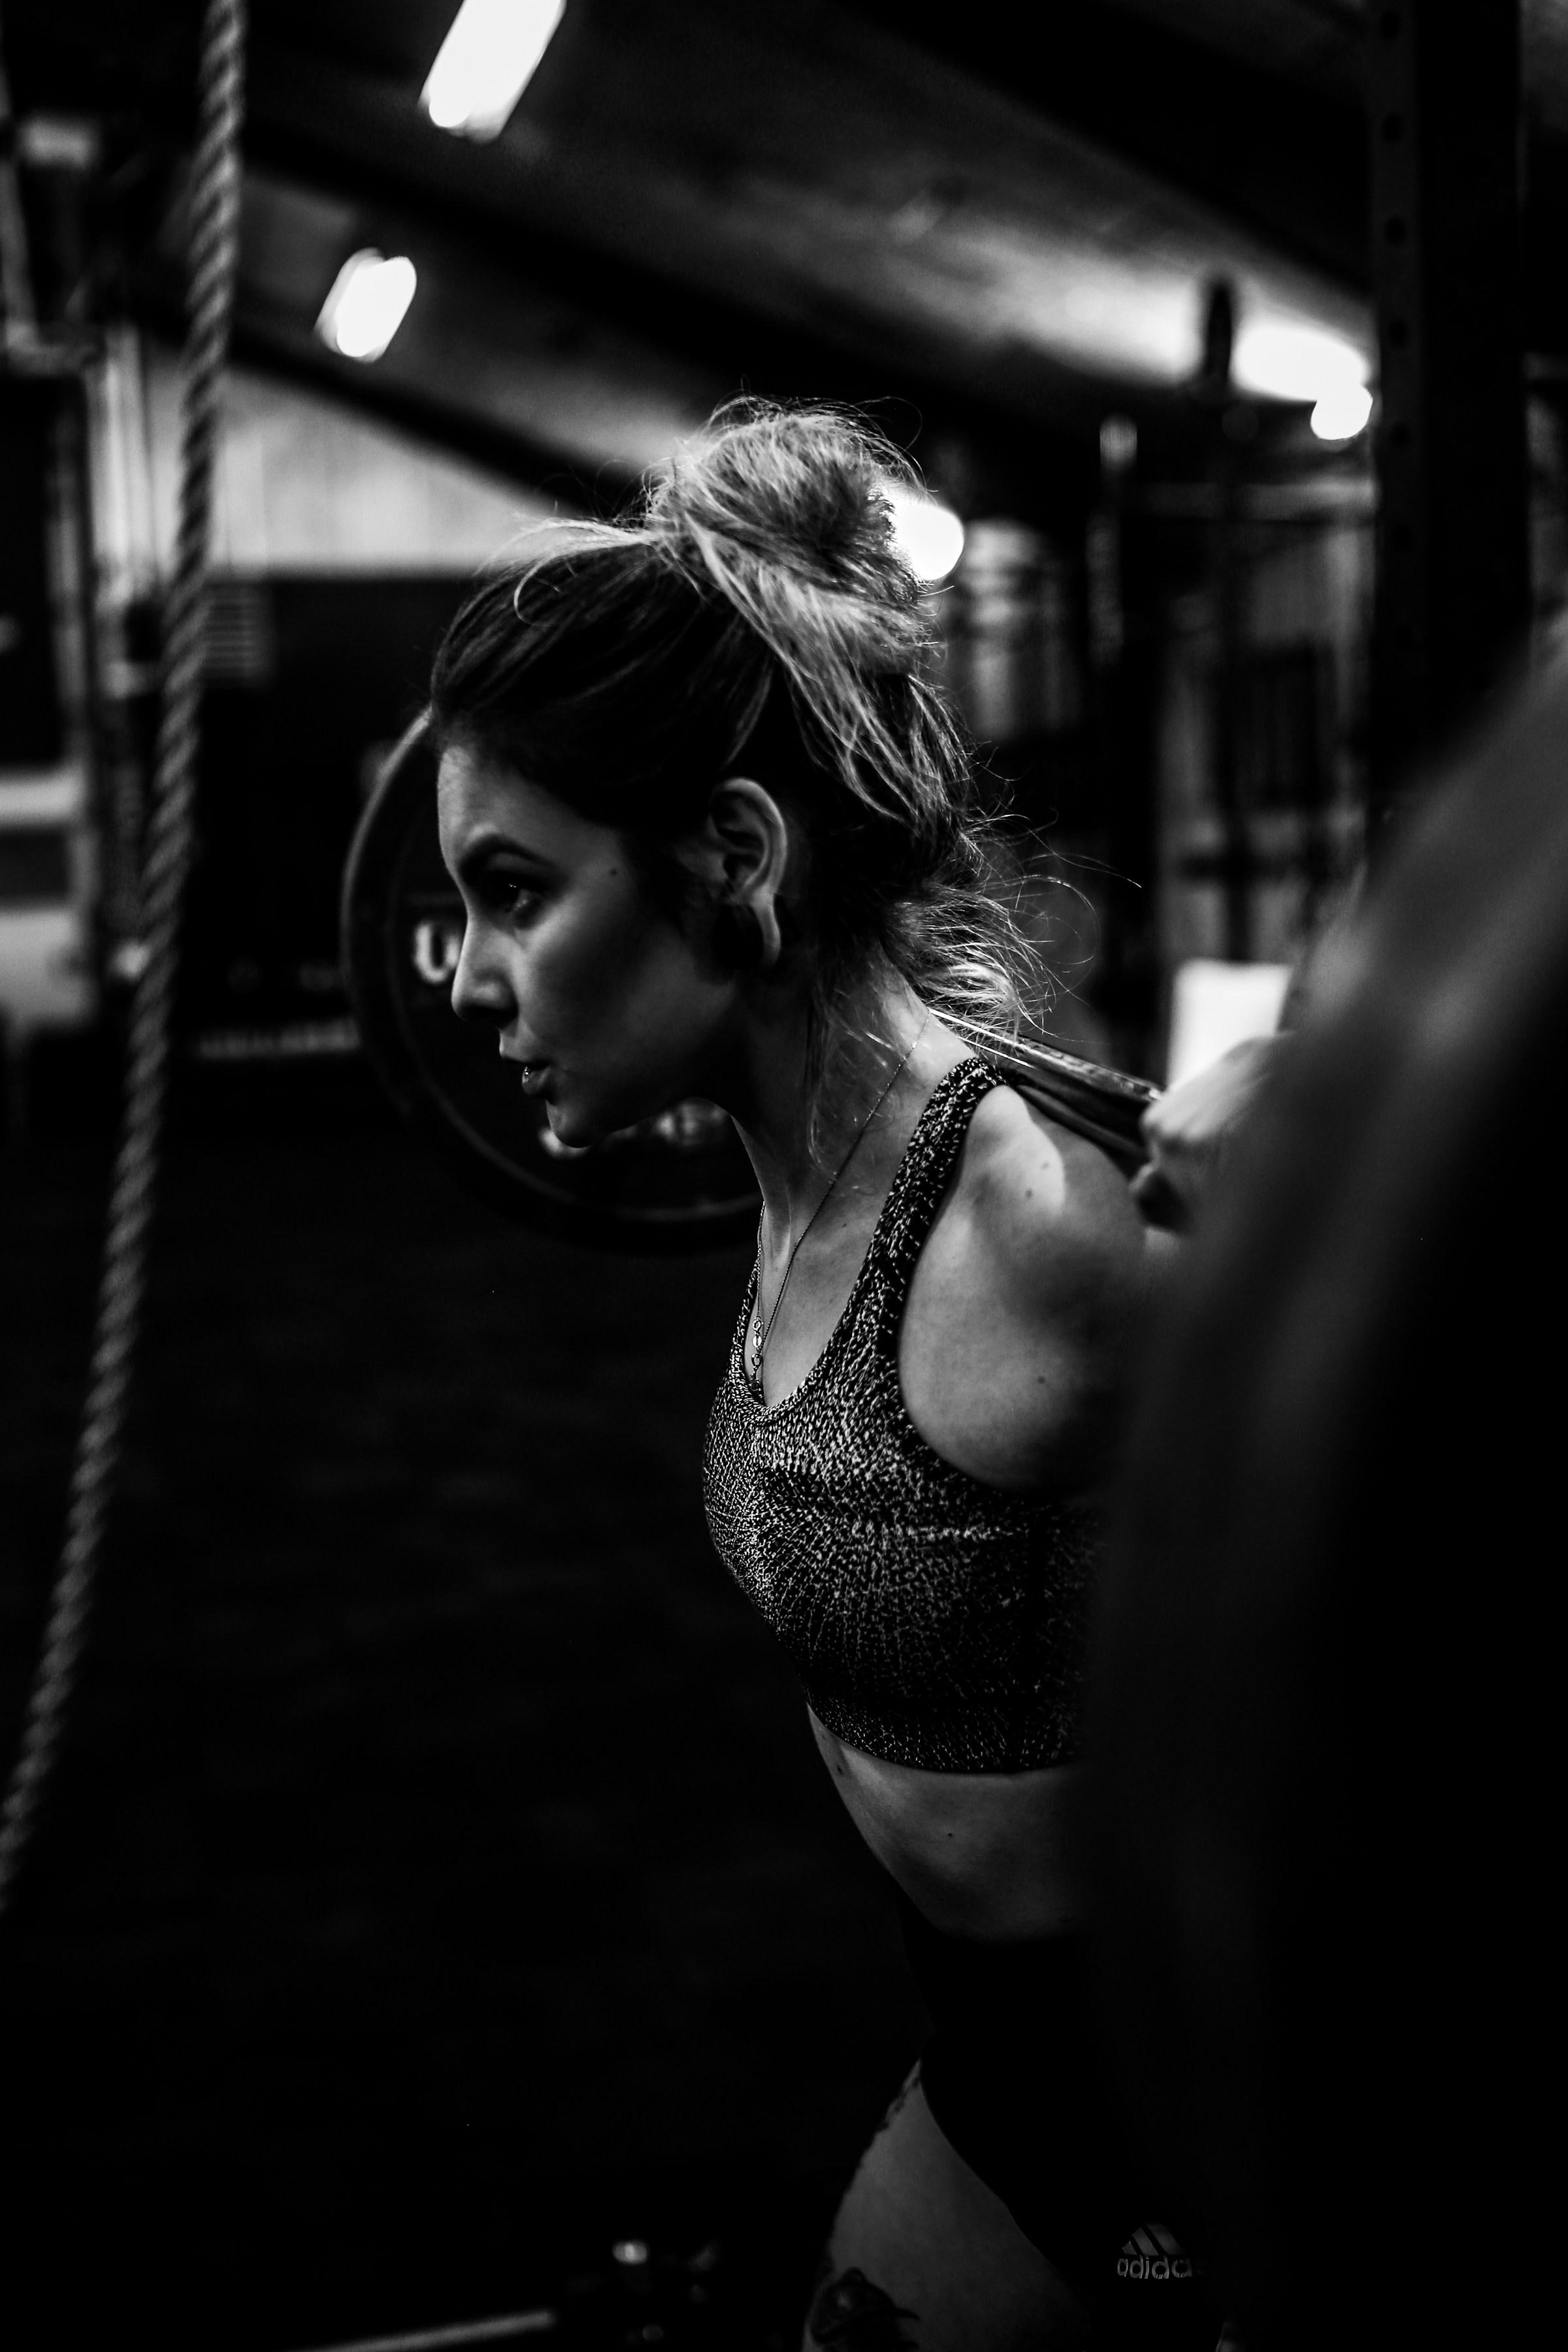 A woman at the gym | Source: Unsplash